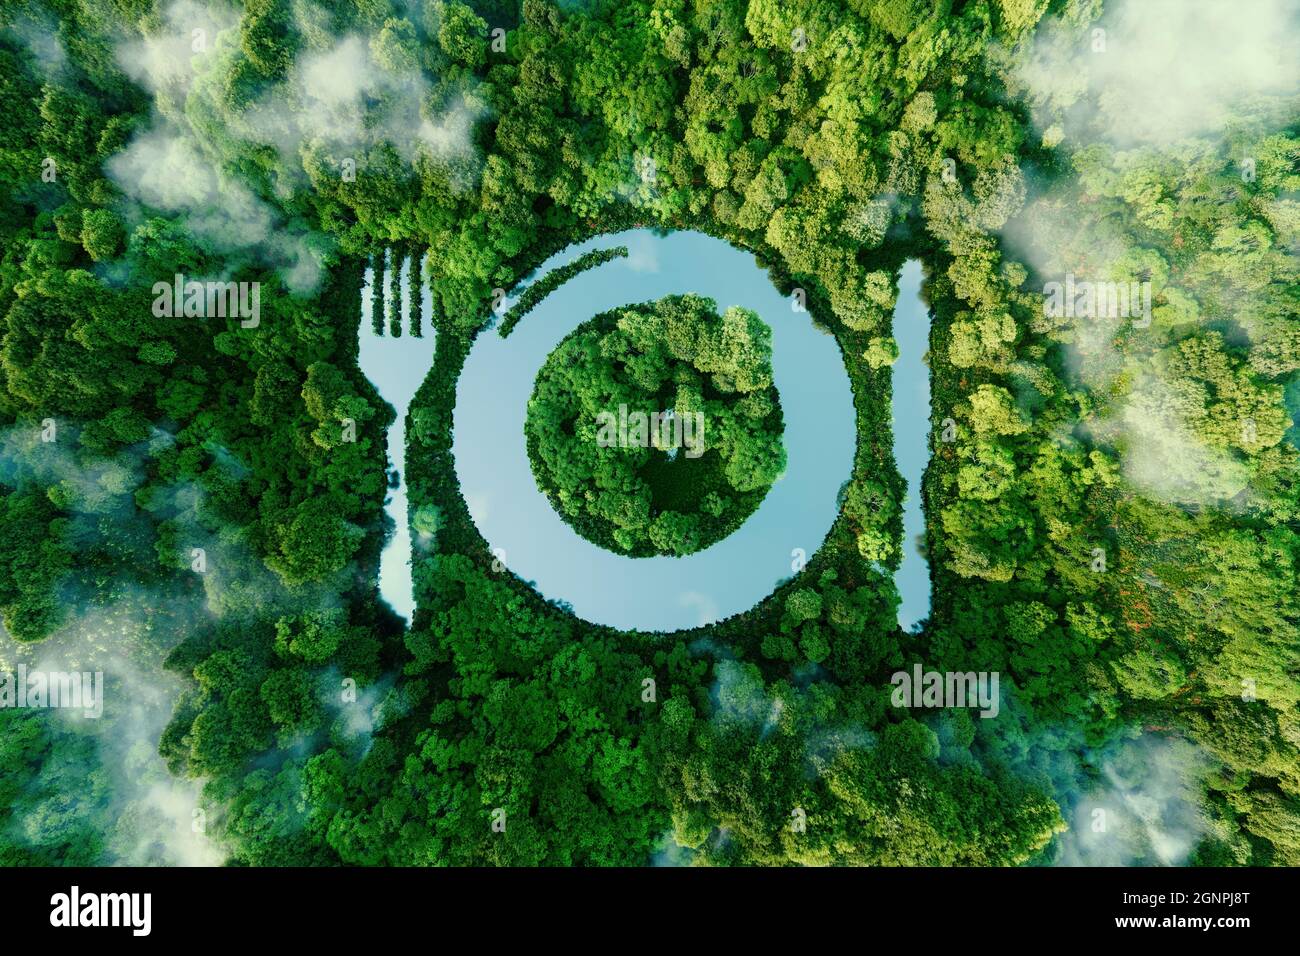 A lake in the shape of a cutlery plate, in the middle of unspoilt nature. A metaphor for veganism, vegetarianism and the meat-free trend in eating. 3d Stock Photo